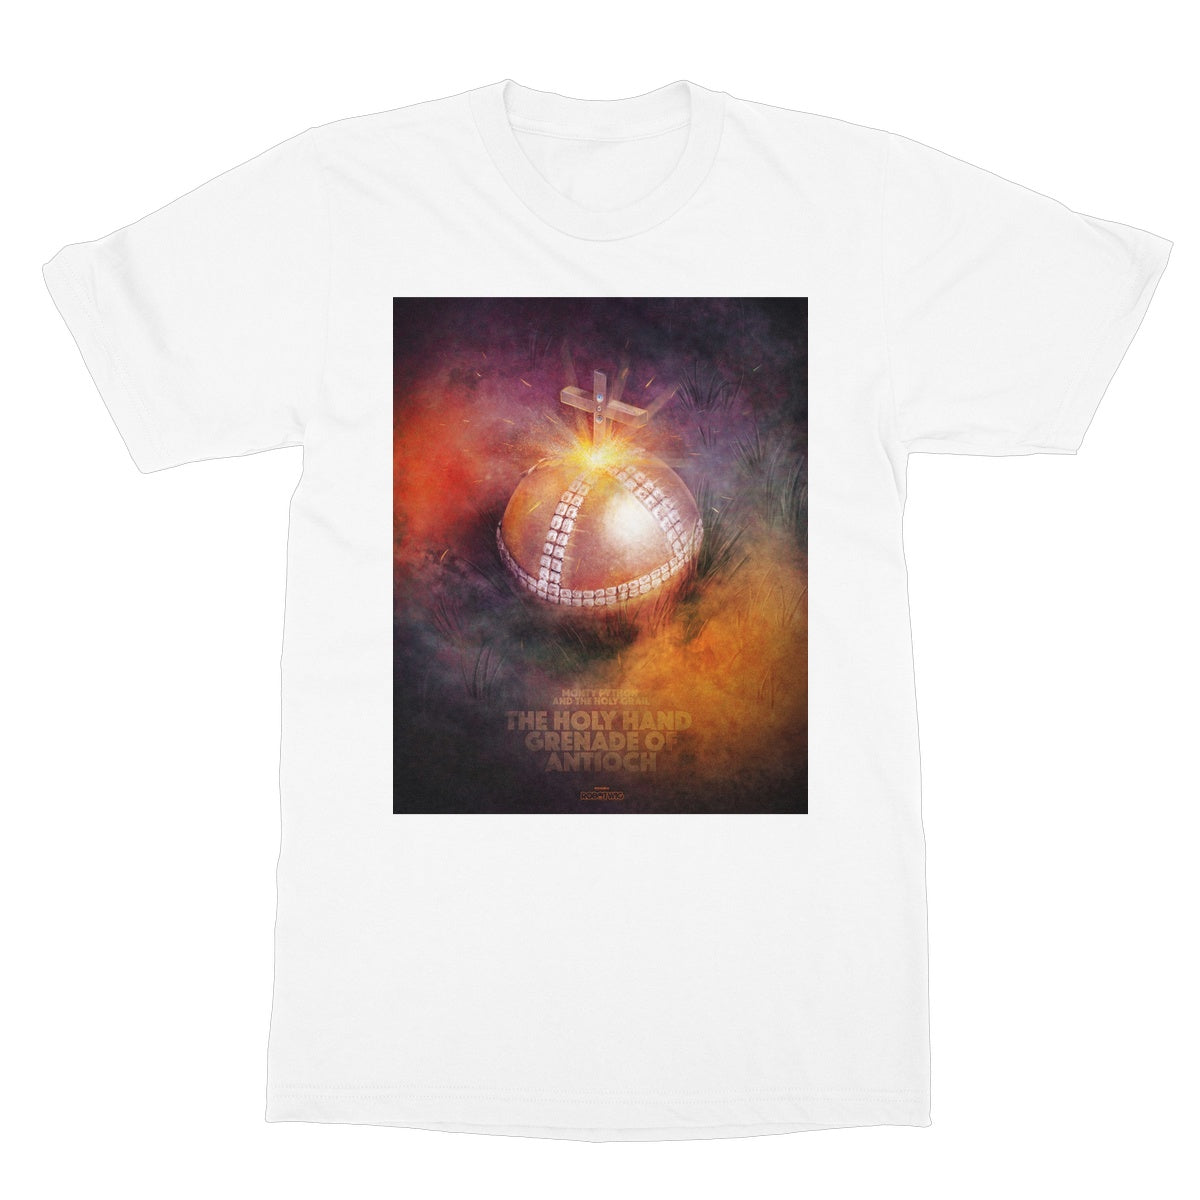 Holy Hand Grenade Illustrated Tee Softstyle T-Shirt